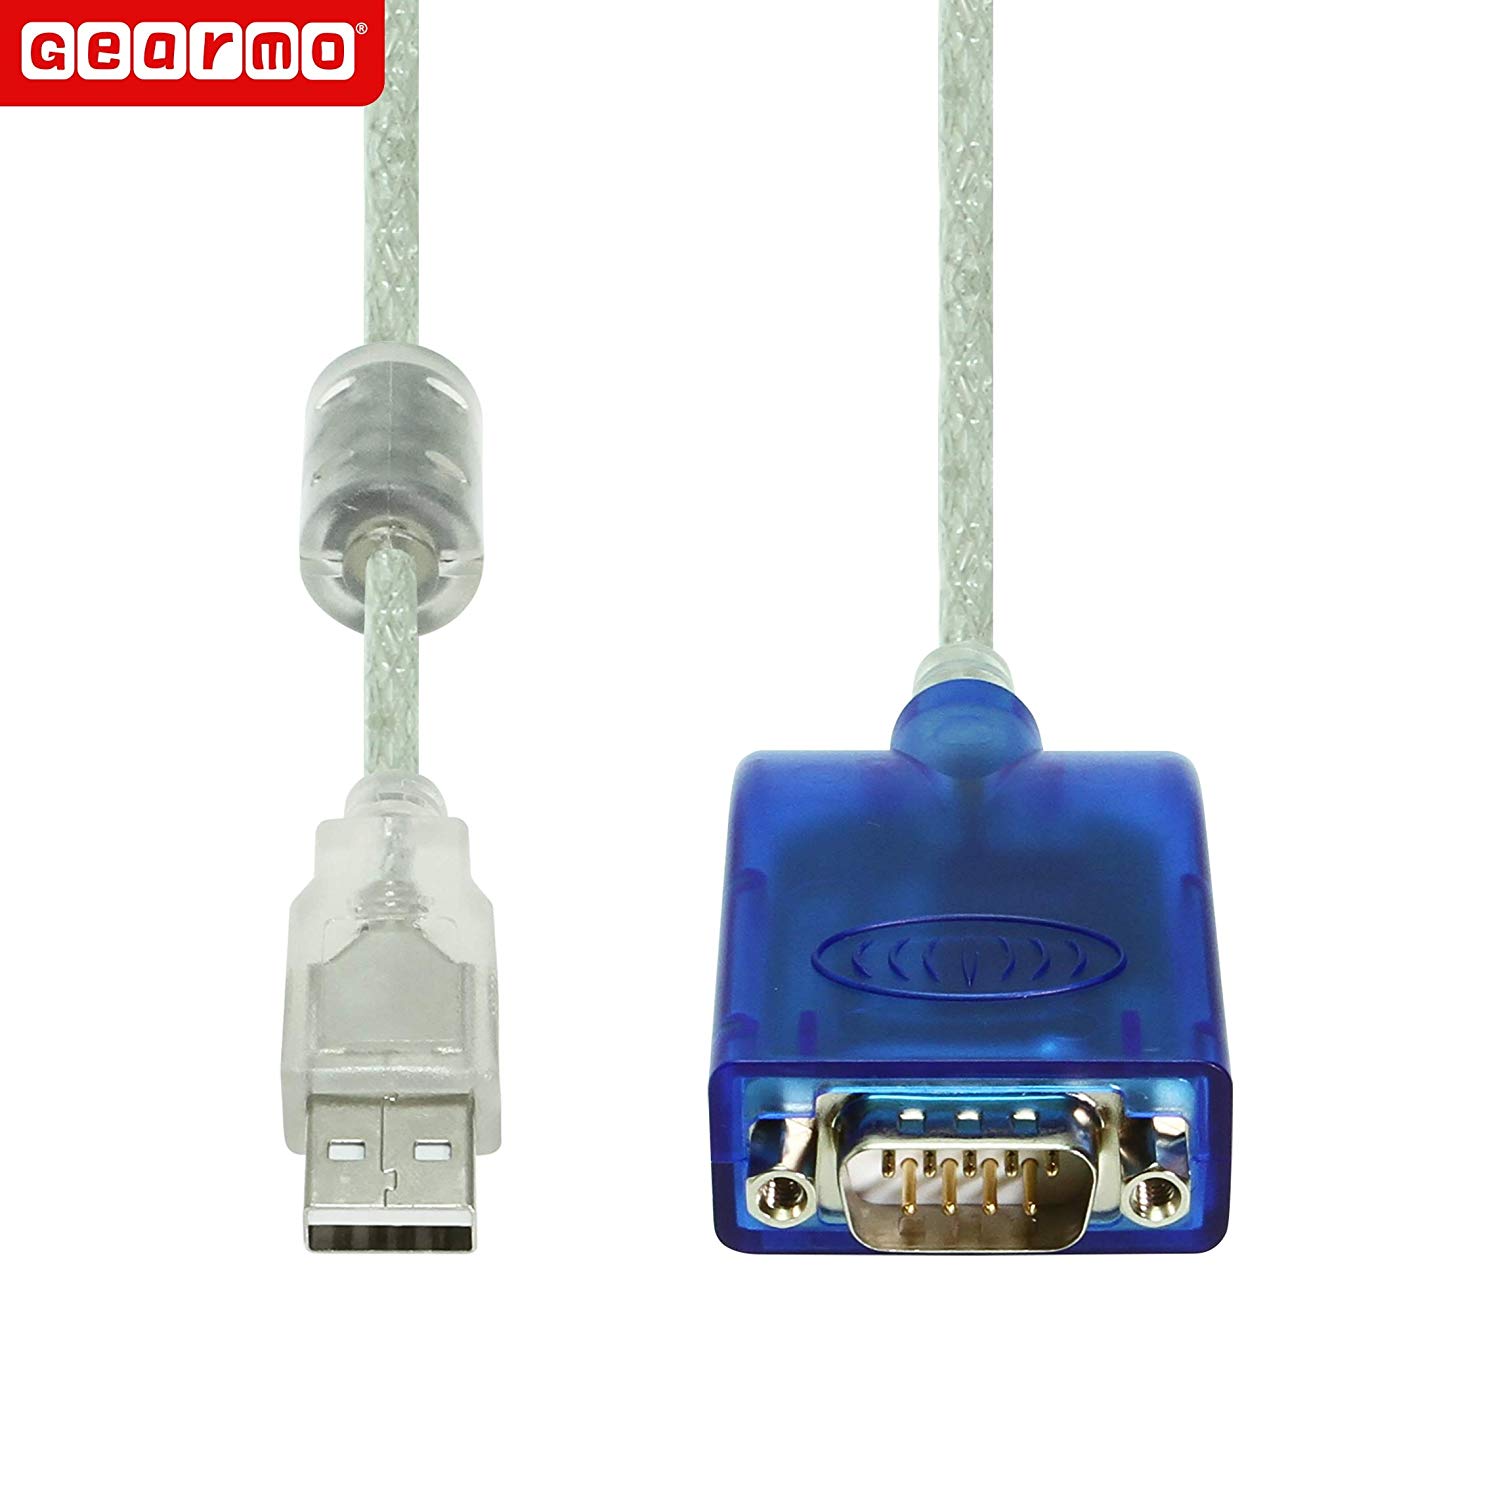 Gearmo USB to RS-232 Serial Adapter with FTDI Chipset and TX/RX LEDs 3 ft